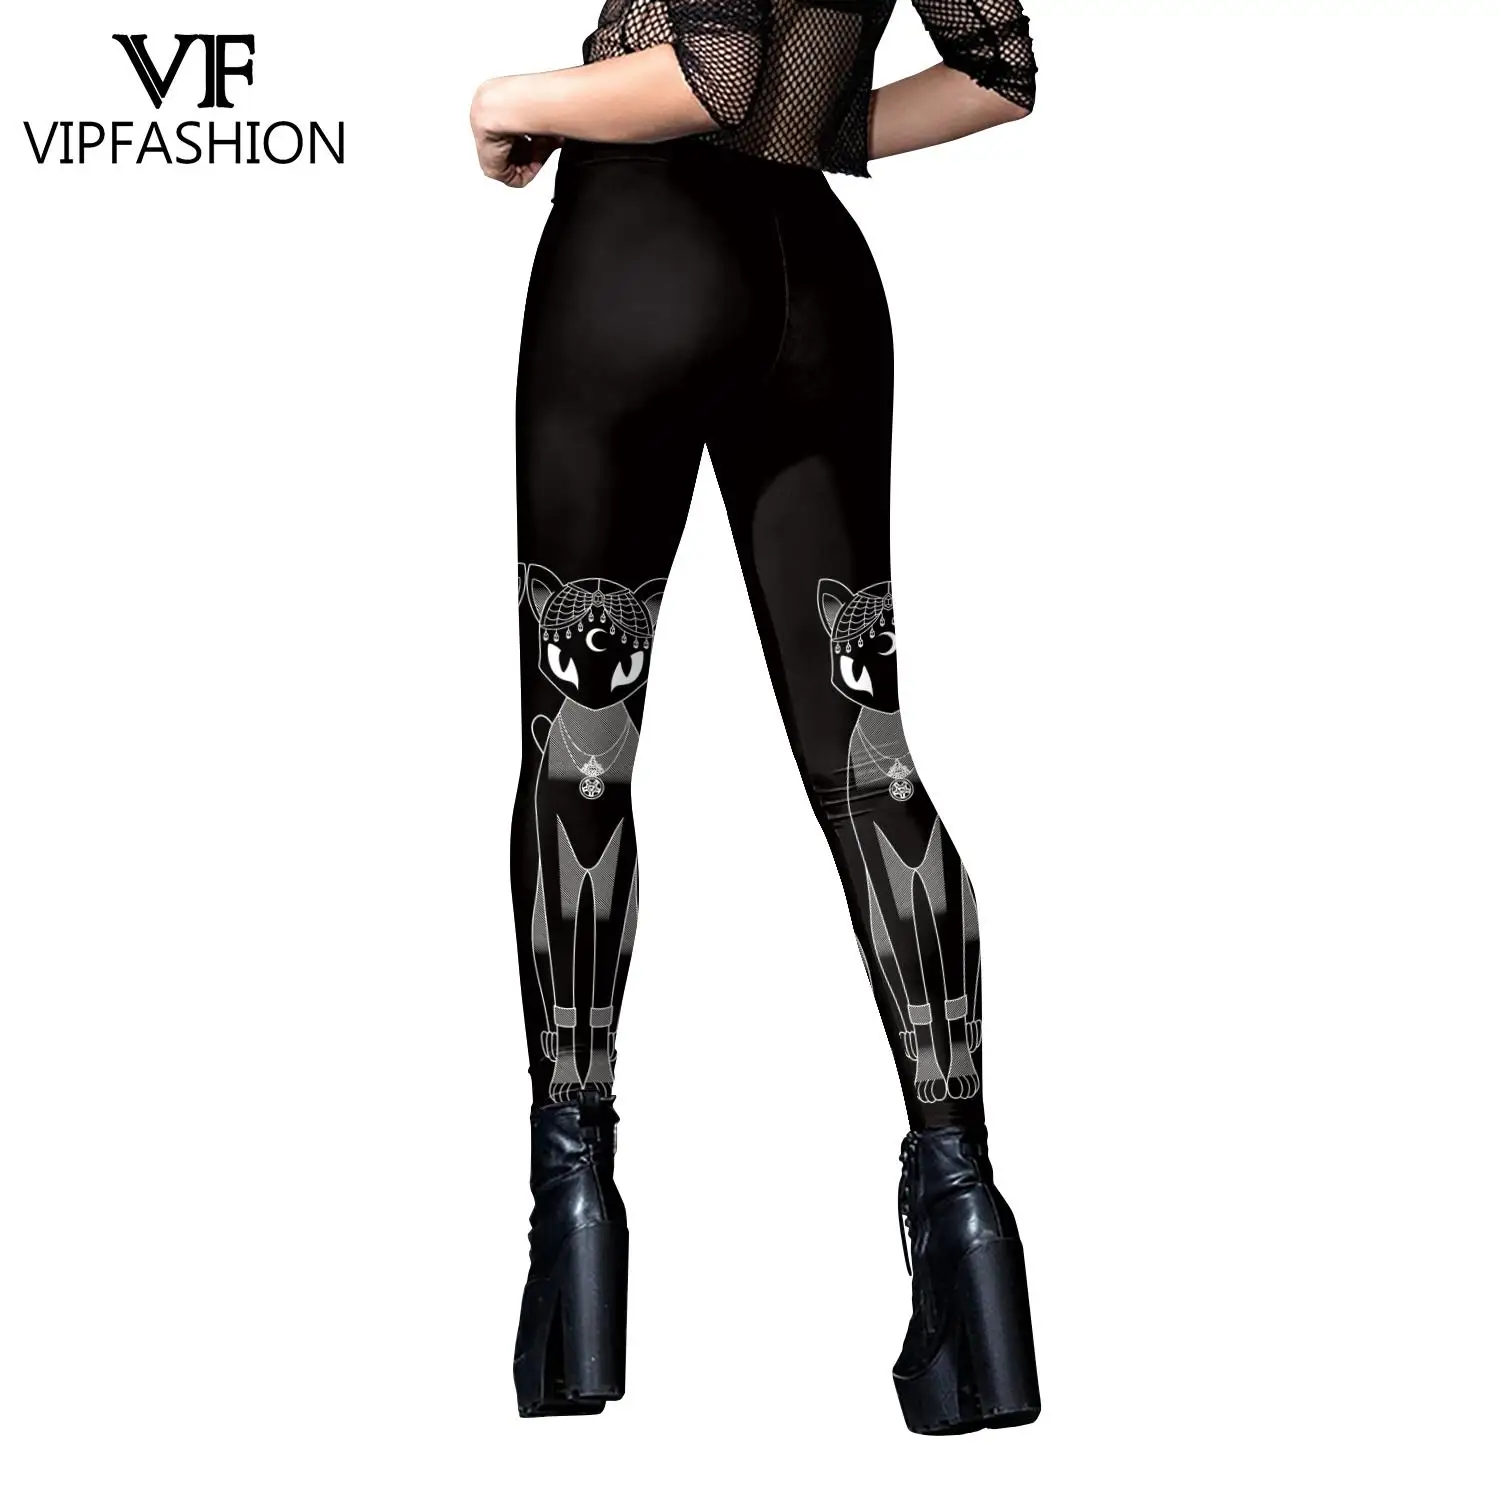 VIP FASHION Woman Gothic Leggings Sexy Steampunk Print Trousers Elastic Vintage Skinny Pencil Pants Ankle Length Cosplay Bottom images - 6